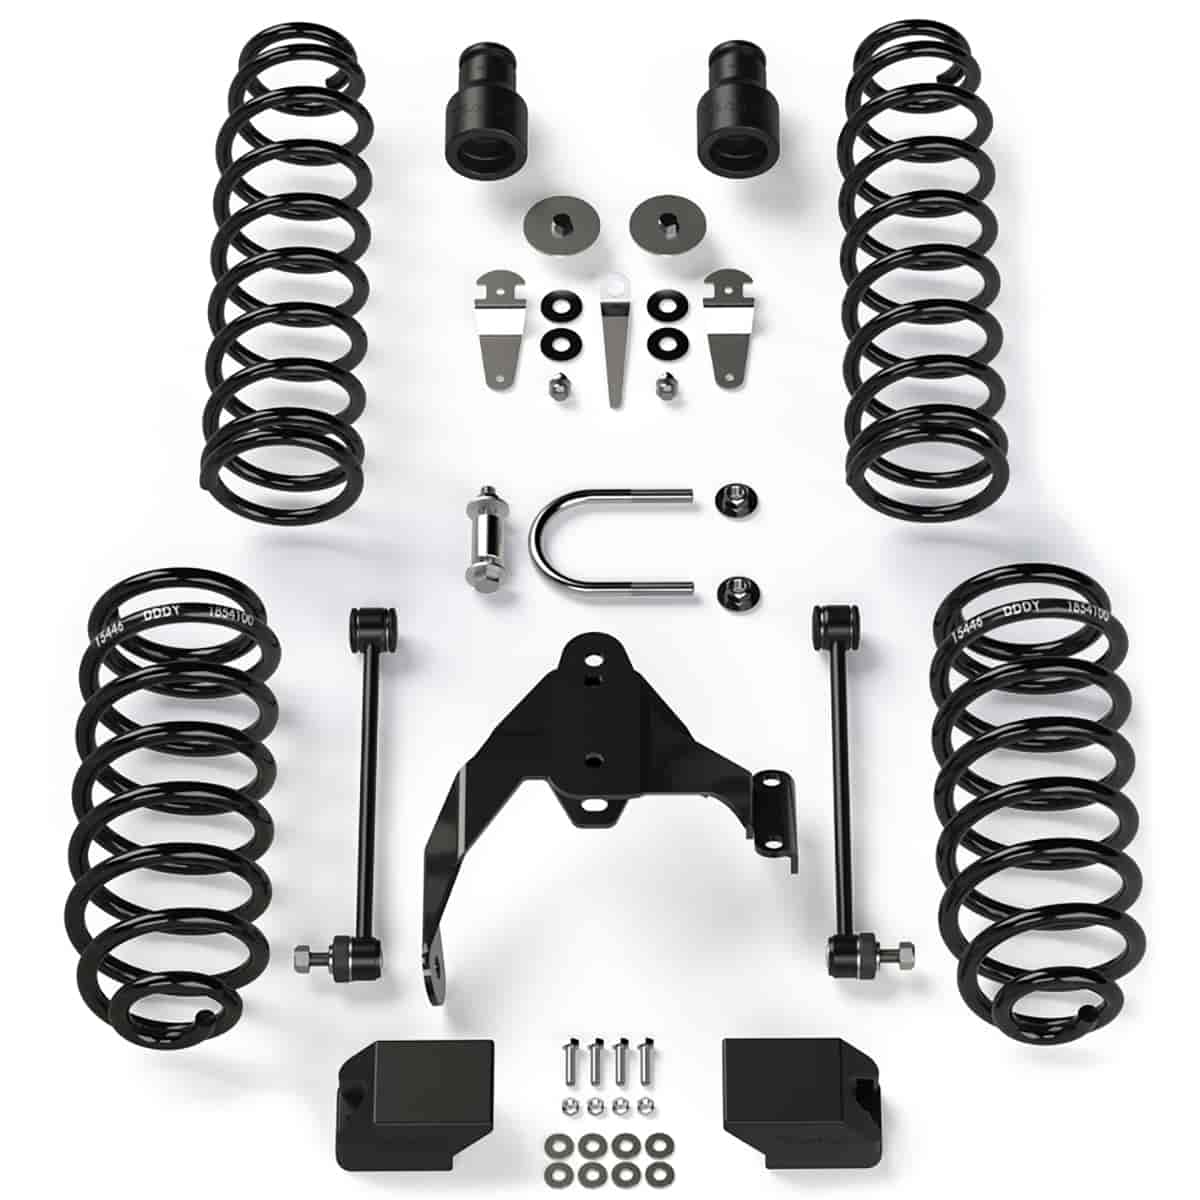 1351000 Front and Rear Suspension Lift Kit, Lift Amount: 2.5 in. Front/2.5 in. Rear